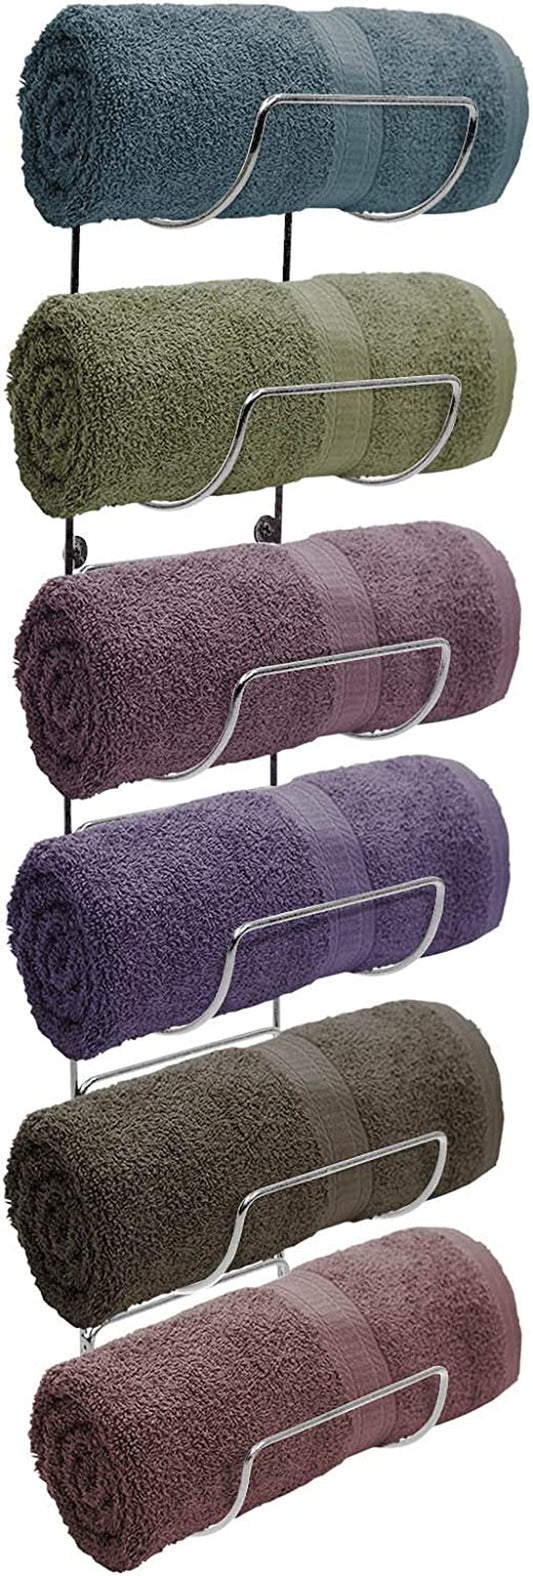 Towel Rack Wall Mount – 6 Compartments of Silver Metal Towel Holder for Bathroom Decor Sets